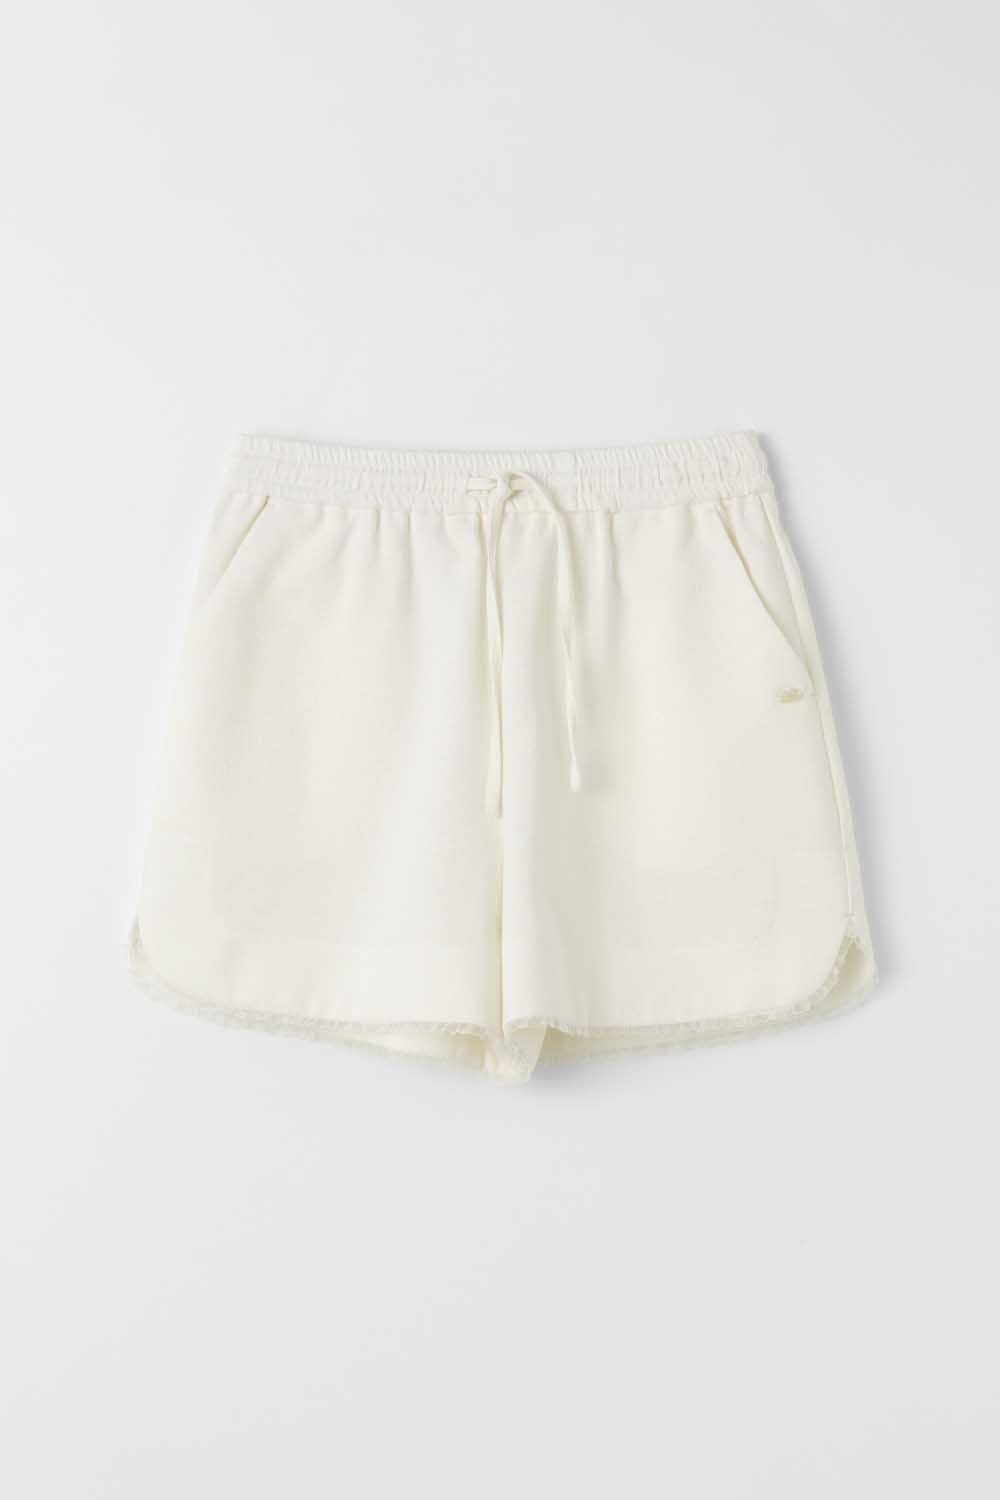 S Tweed Lace Banding Pants_White